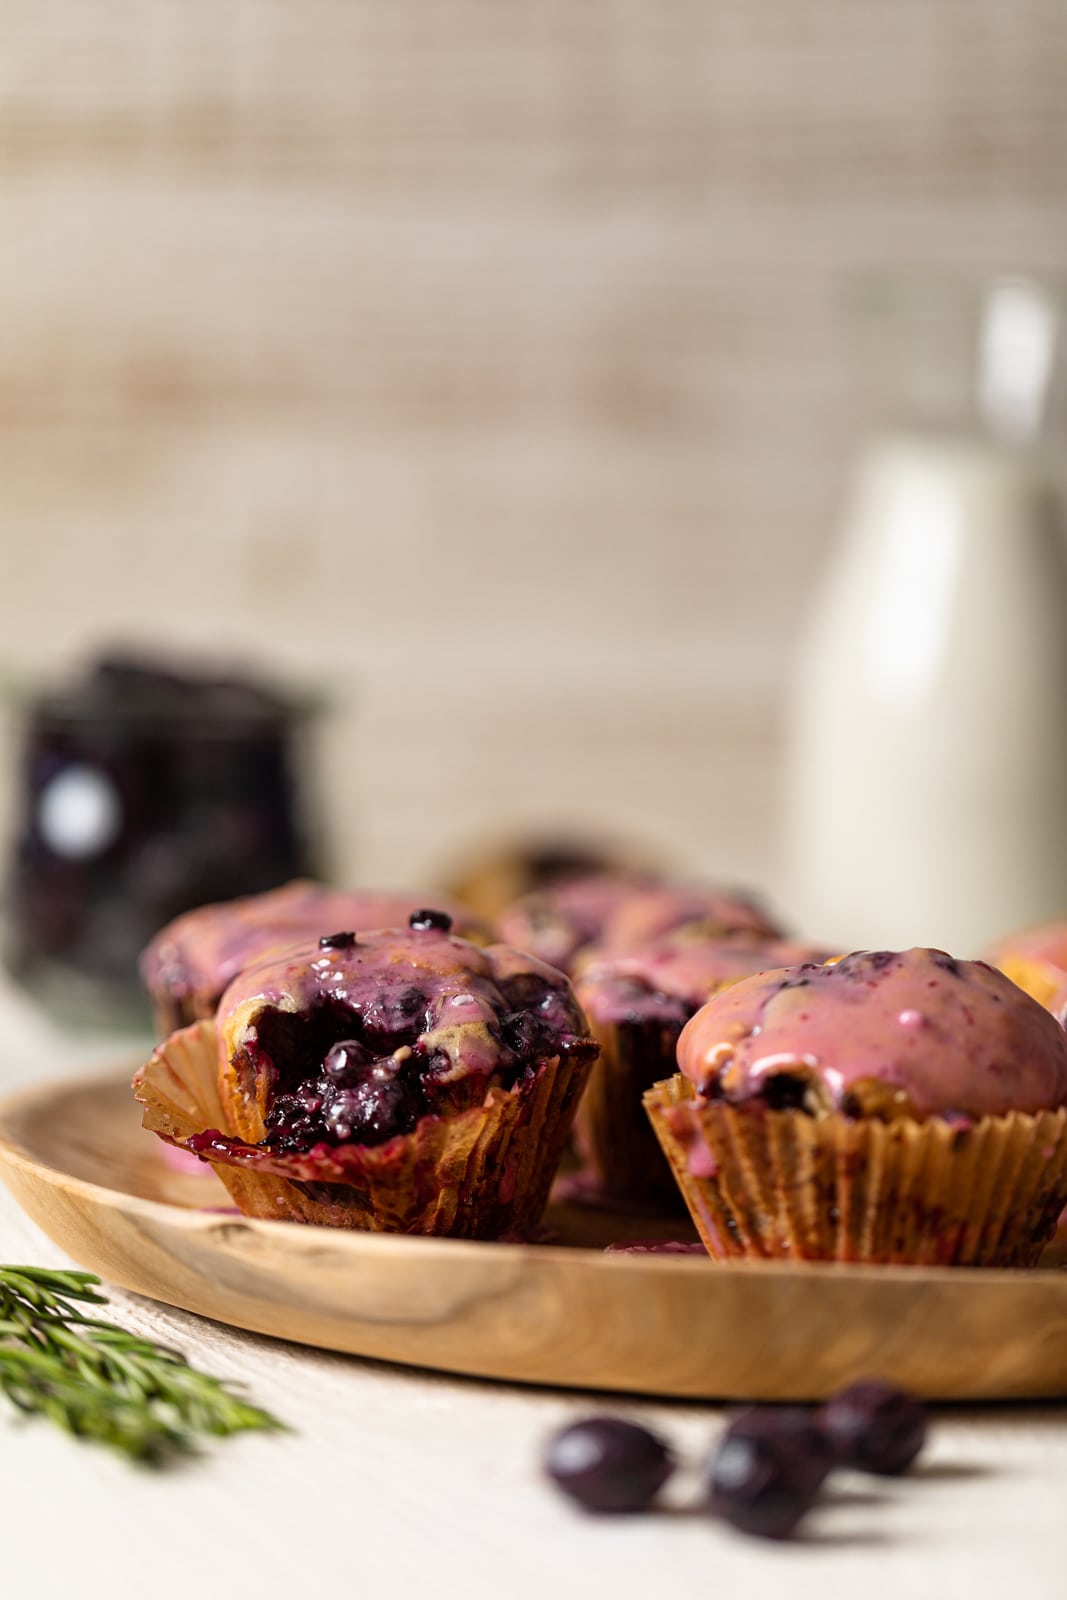 Blueberry Blackberry Jam Muffins on a wooden plate